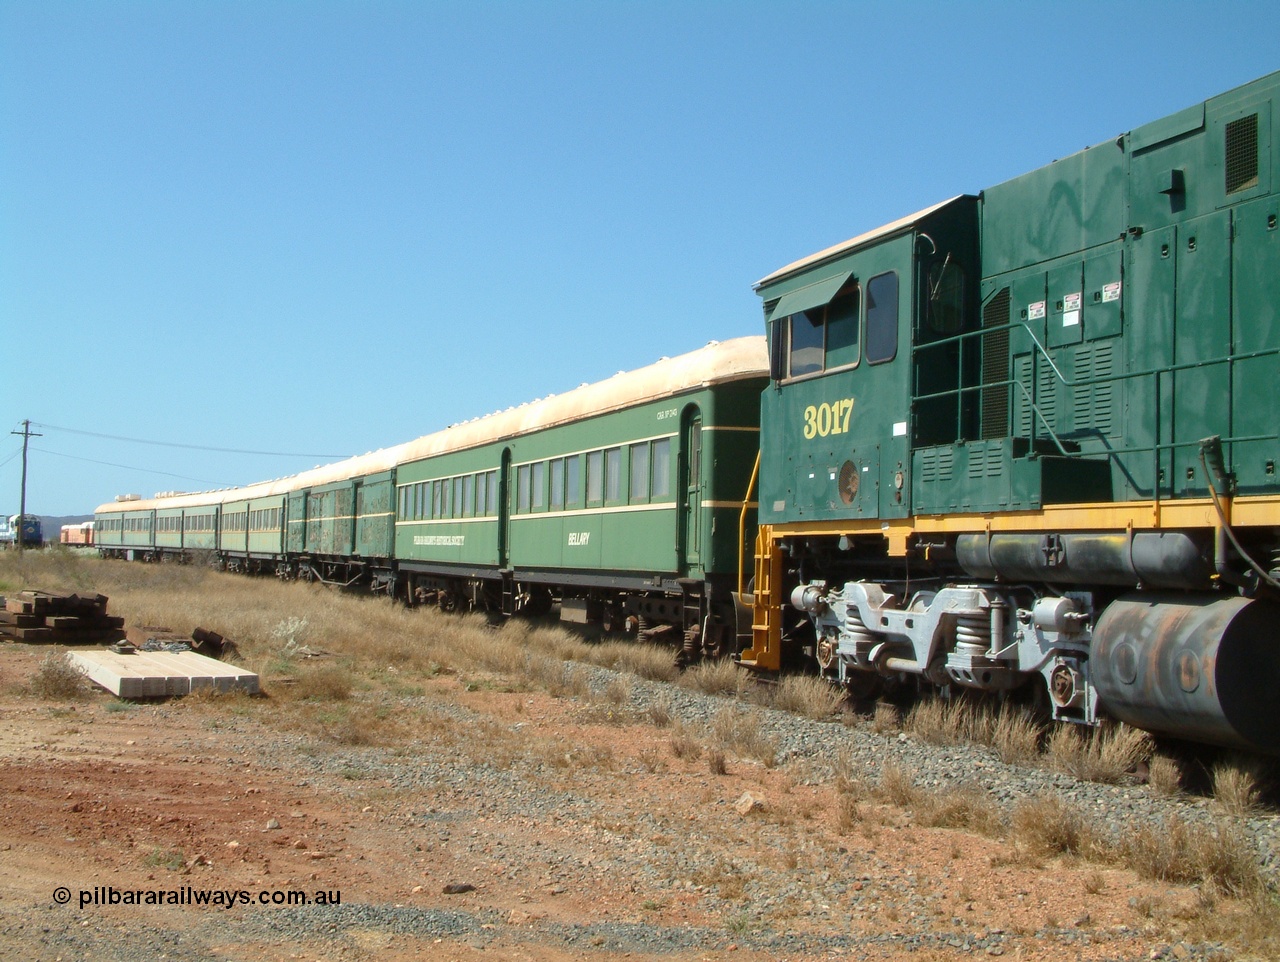 041014 142329
Pilbara Railways Historical Society, view along the passenger carriages behind rebuilt ALCo C636R locomotive 3017 with the first passenger carriage 'Bellary' was originally built by Clyde Engineering at Granville NSW in 1936 for the NSWGR as a second class railway carriage FS type FS 2143. In 1987 it was purchased by the Society and is named after a local river. The next carriage is van 'Portland' and originally an NSWGR MHO type guards van MHO 2321, then recoded to KB type mail van, then to KBY 2513 guards van. 14th October 2004.
Keywords: 3017;Comeng-WA;ALCo;C636R;WA-135-C-6043-04;rebuild;